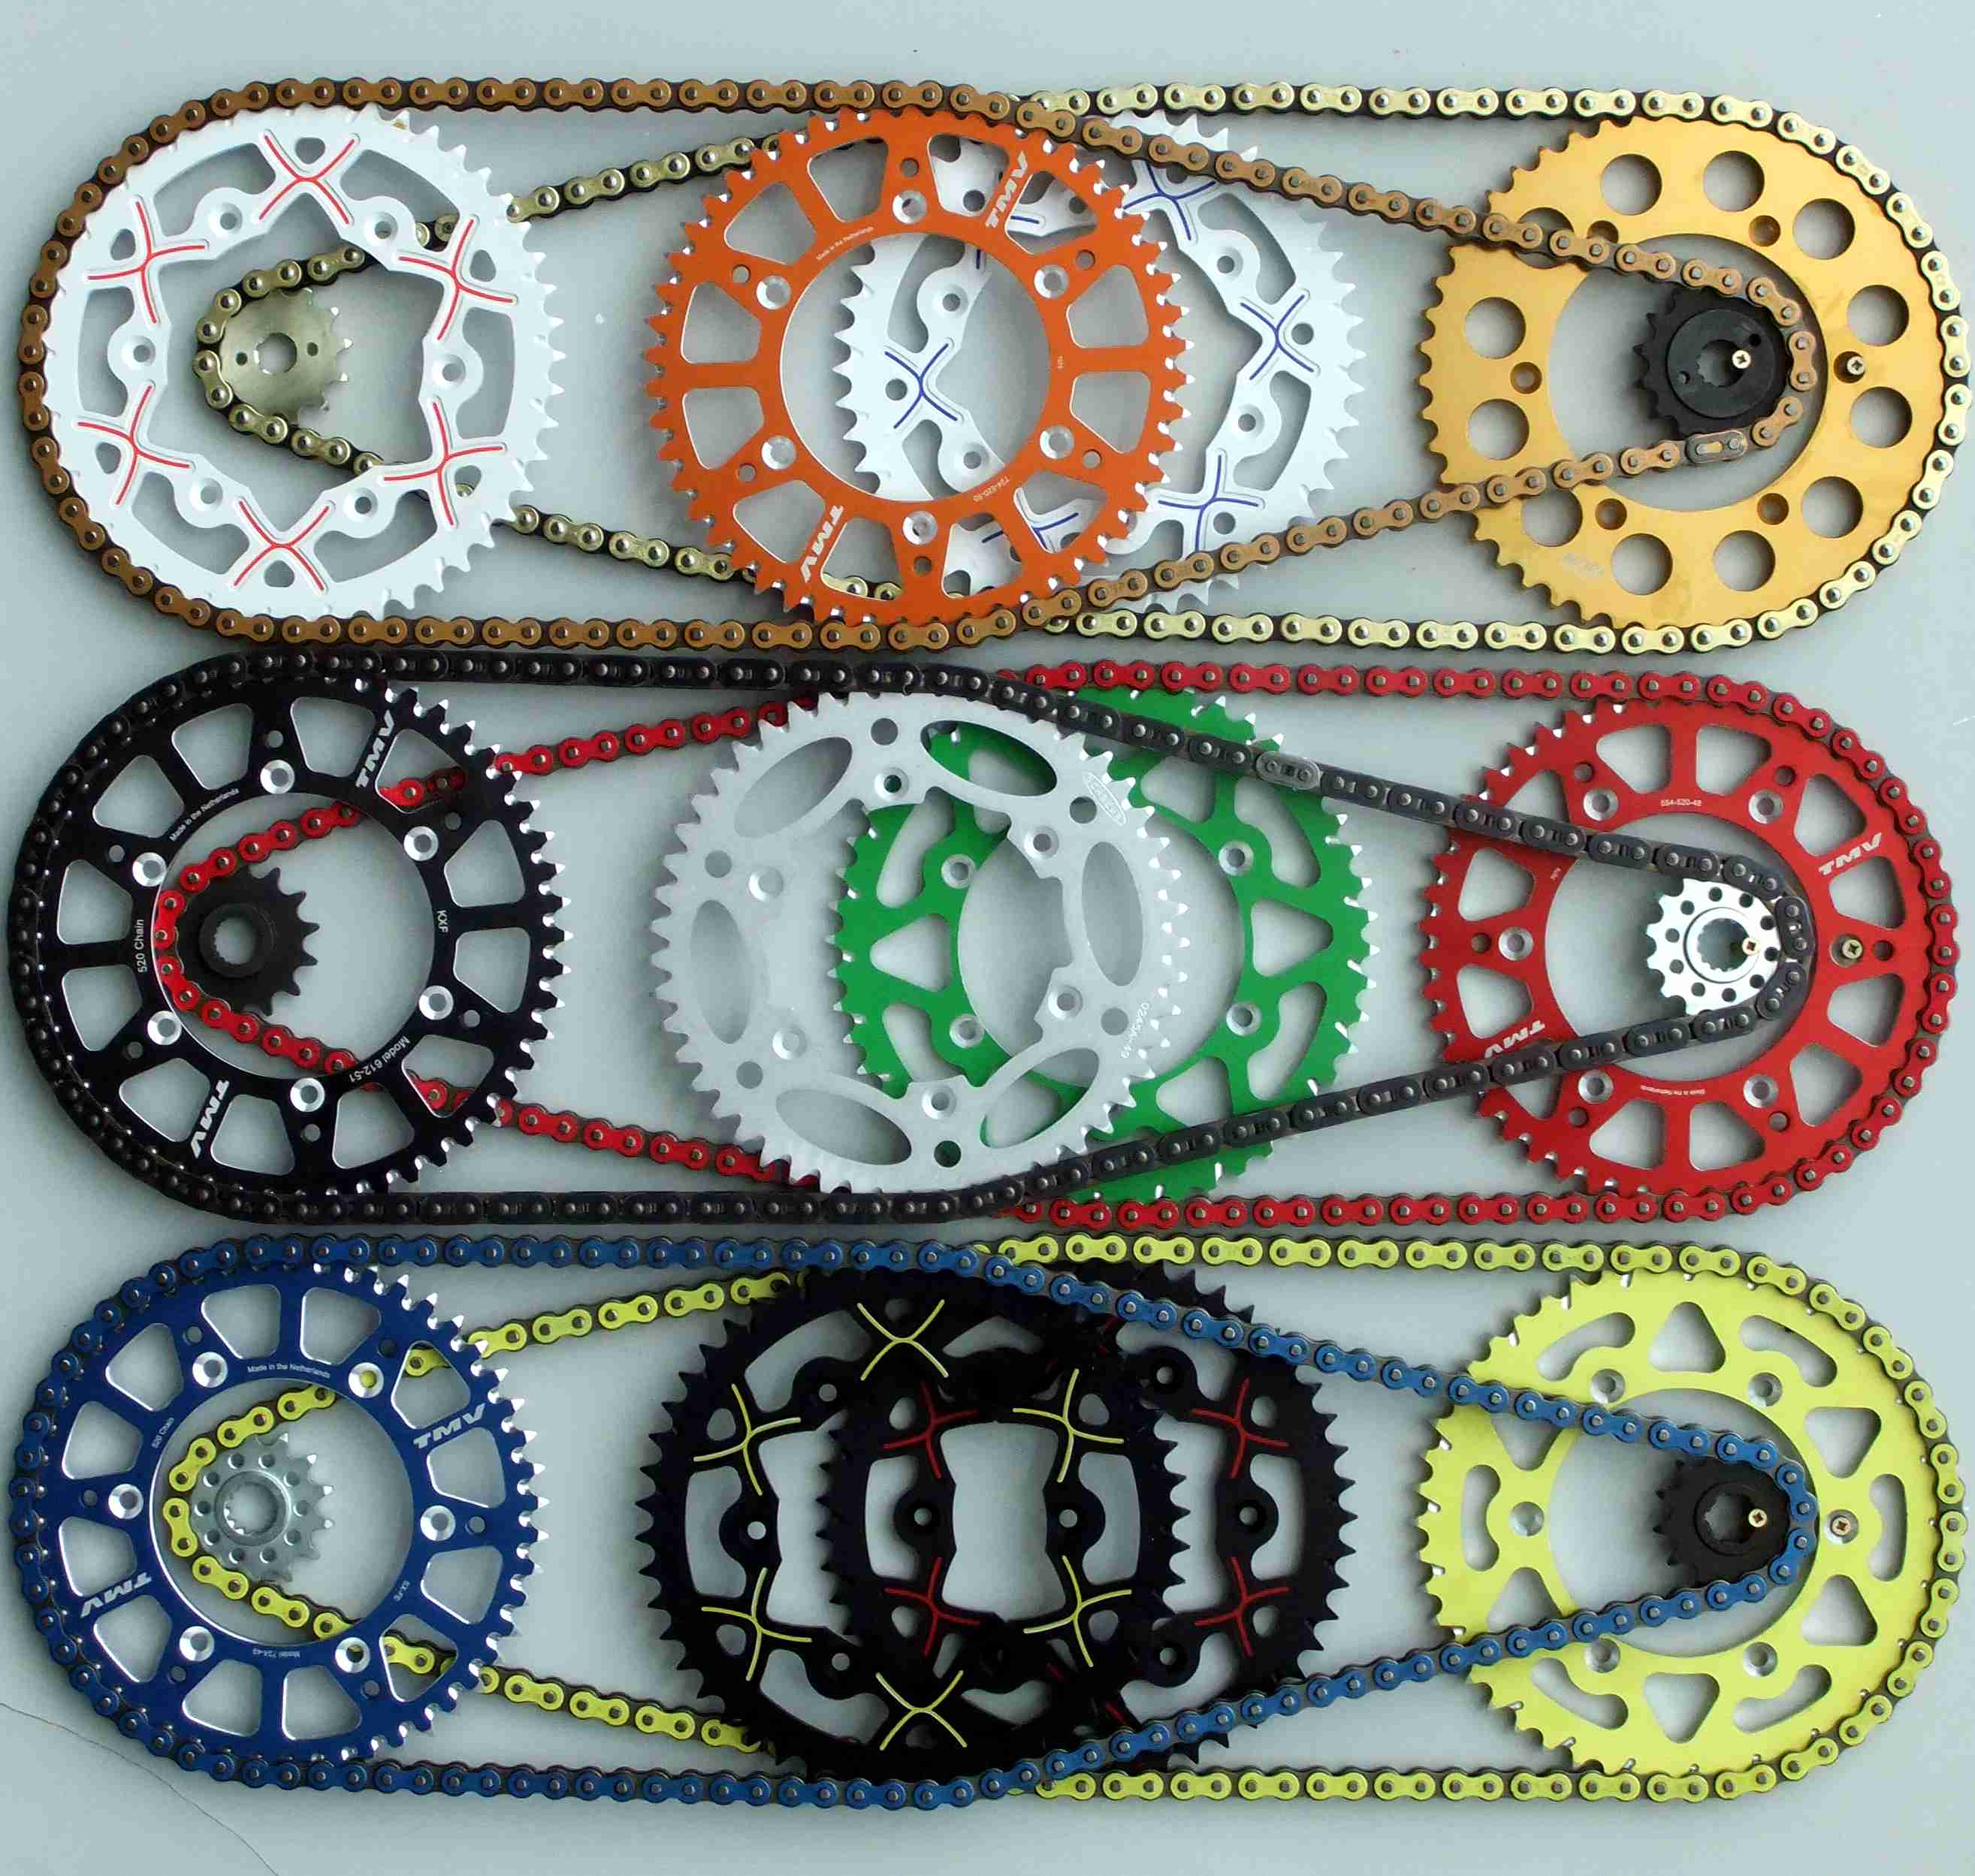 ON REQUEST OFFROAD CHAIN SET WITH THE DOSE FOR KIT SILVER / BLACK / OR COLOURED ON GAS GAS EC / MC 125 MODELS 2001